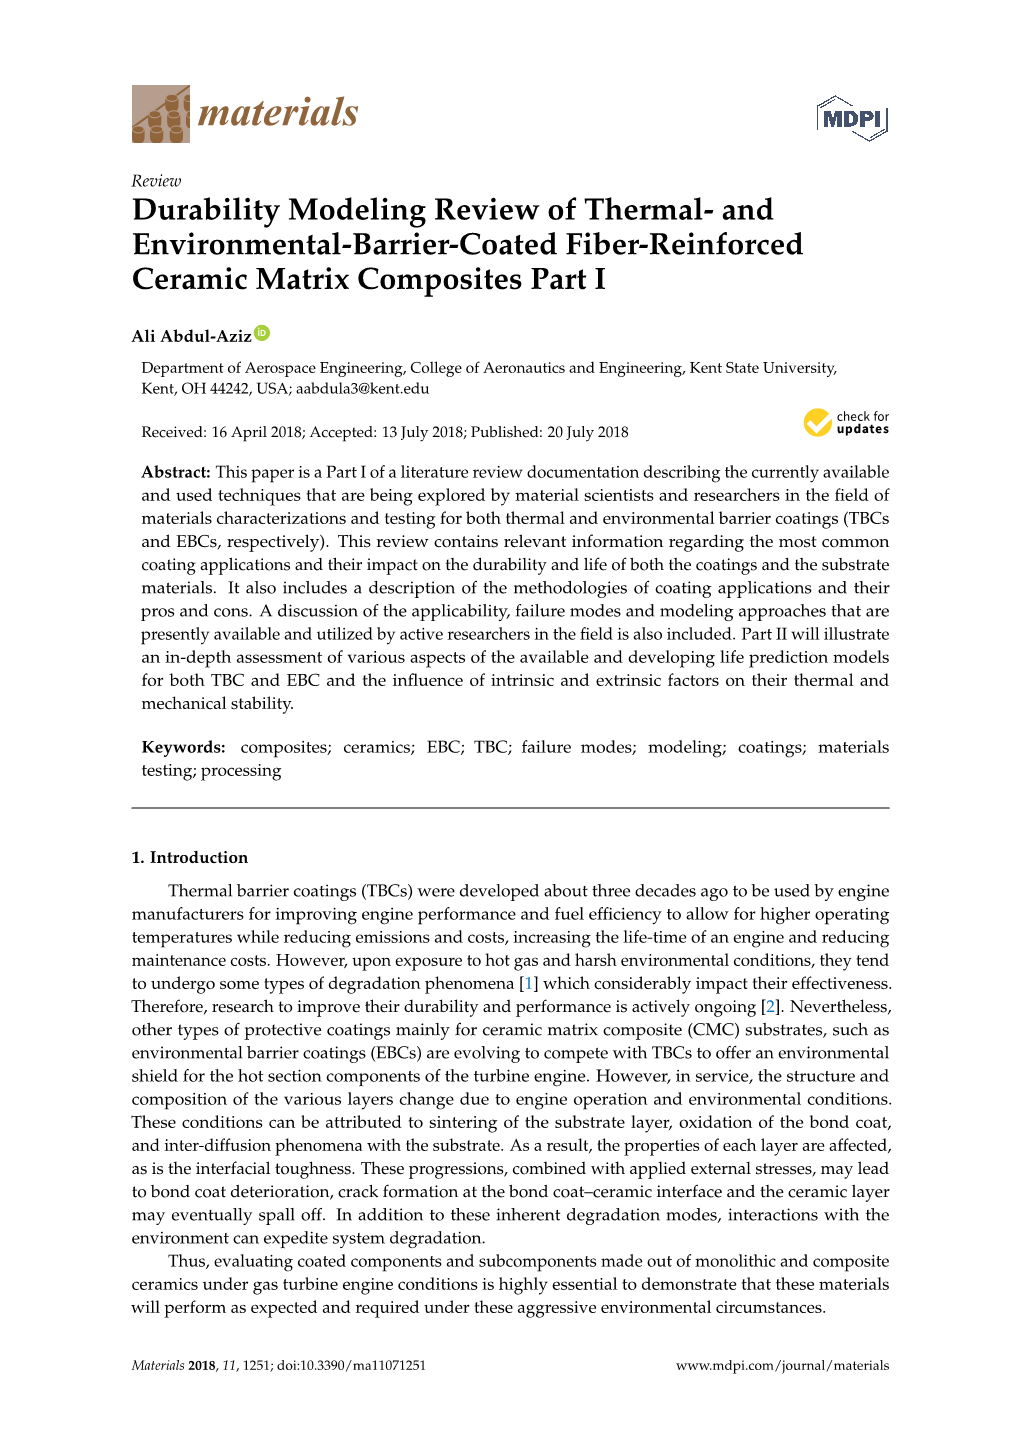 Durability Modeling Review of Thermal- and Environmental-Barrier-Coated Fiber-Reinforced Ceramic Matrix Composites Part I